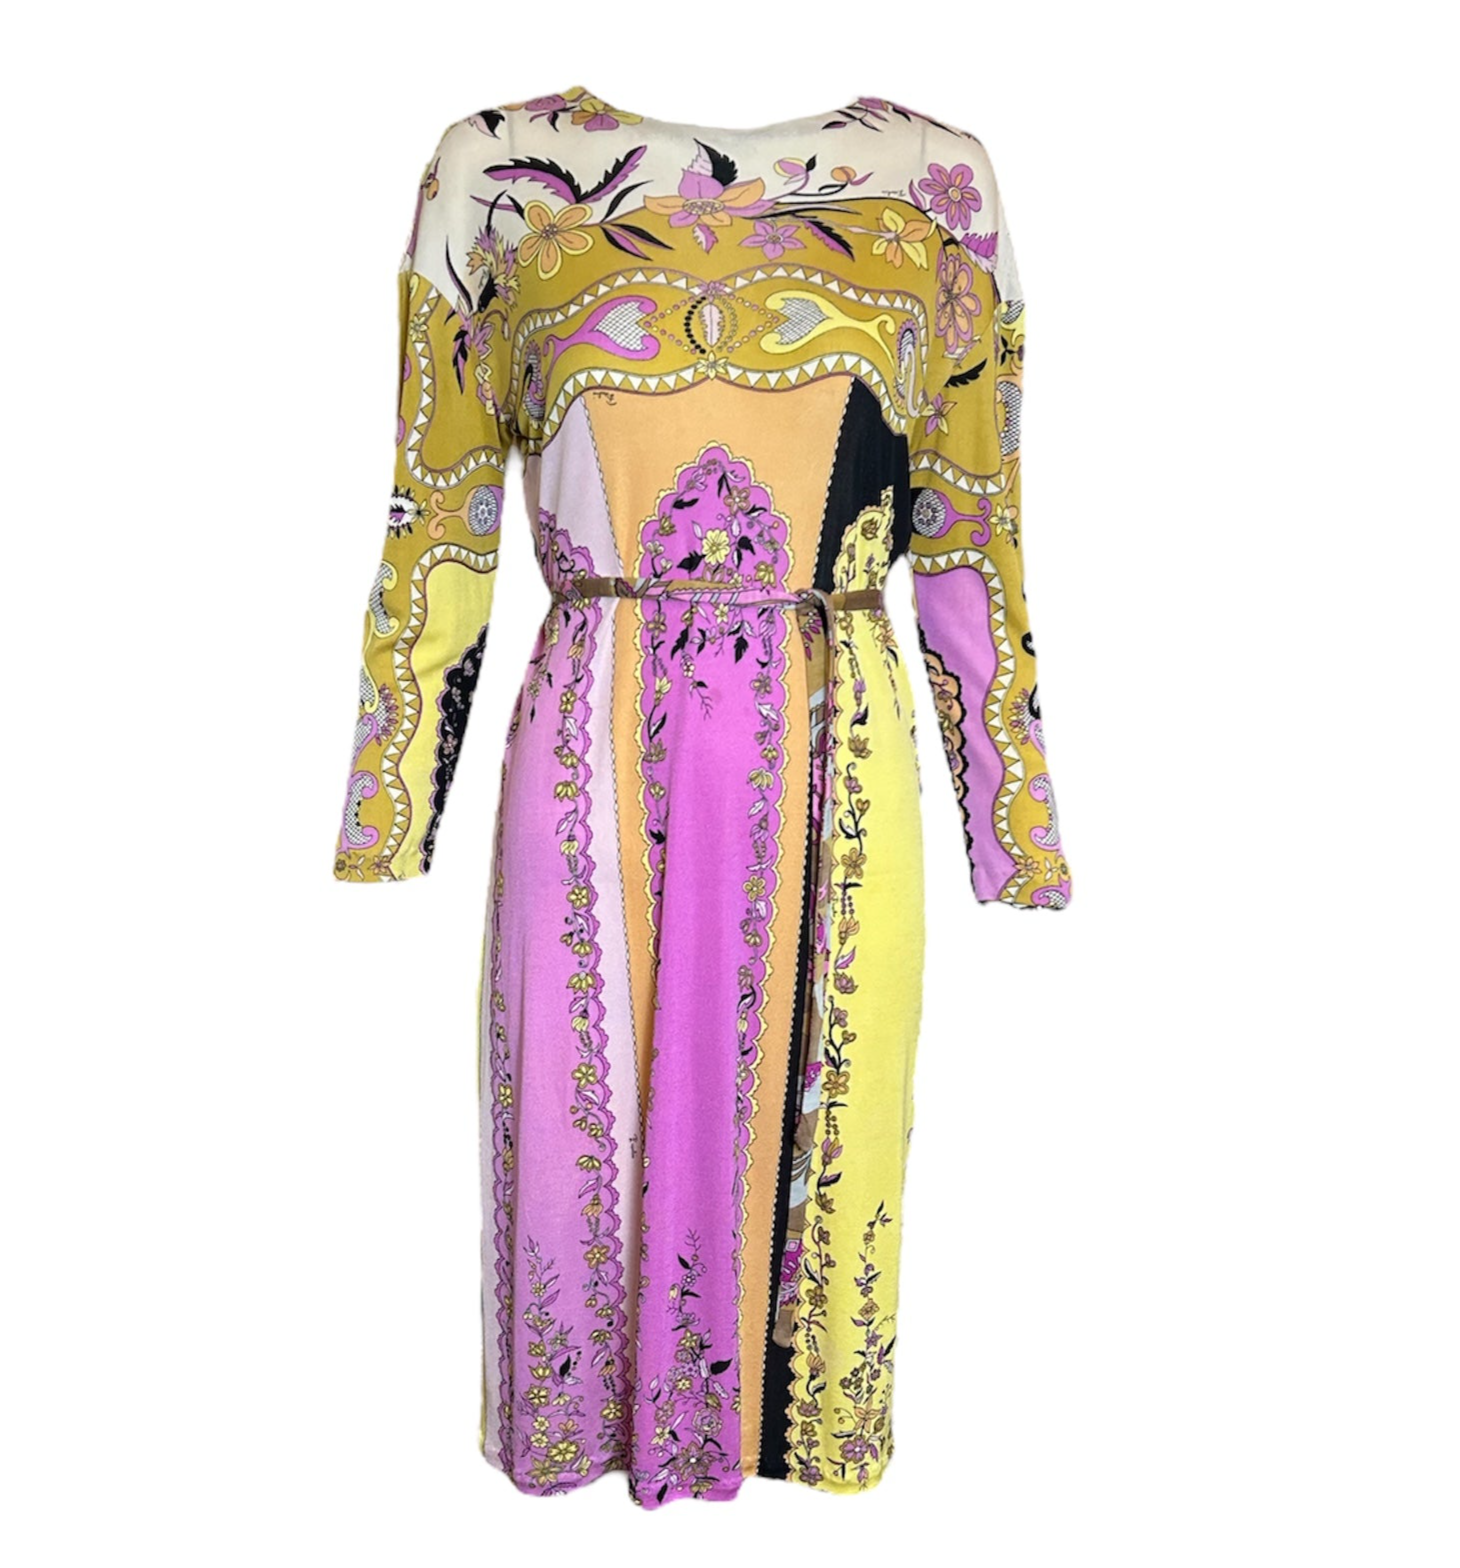  Pucci 1960s Floral Pastels Silk Jersey Dress w/ Belt FRONT PHOTO 1 OF 6